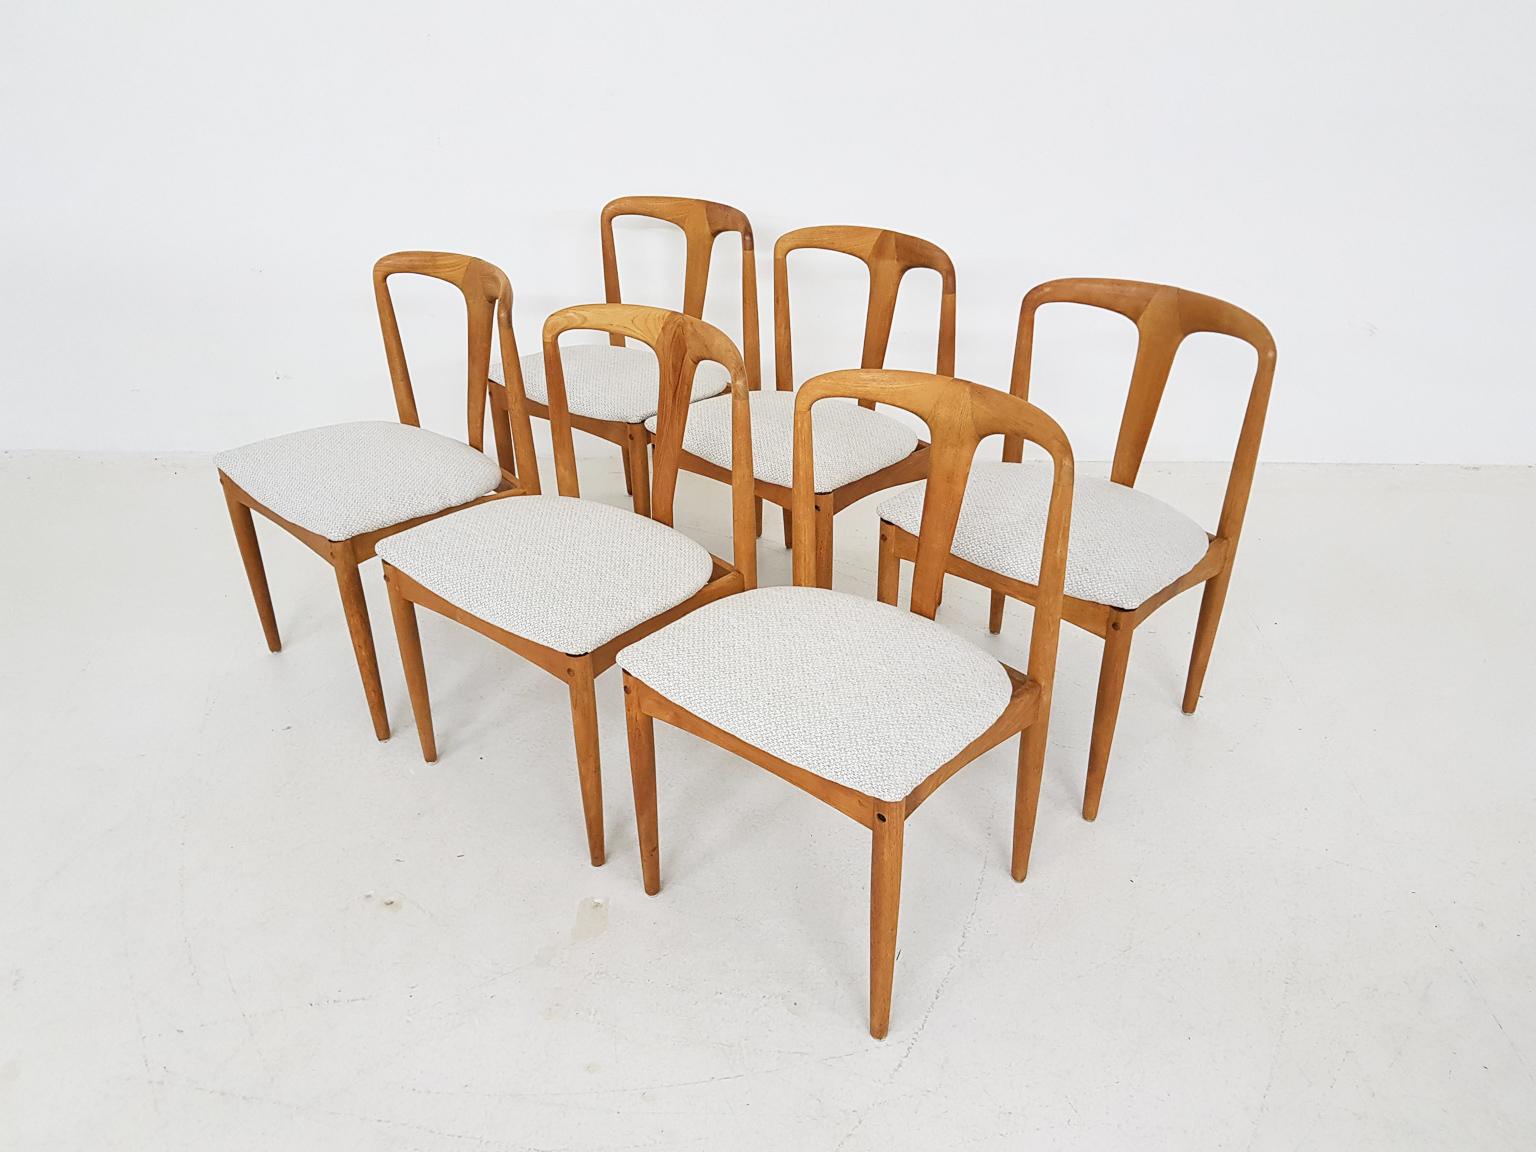 Set of six Danish design dining chairs made of oak and designed by Johannes Andersen. The chairs are produced by Uldum Möbelfabrik in Denmark in the 1950s. The chairs have new off-white upholstery.

Pure craftsmanship as they only the Danish could